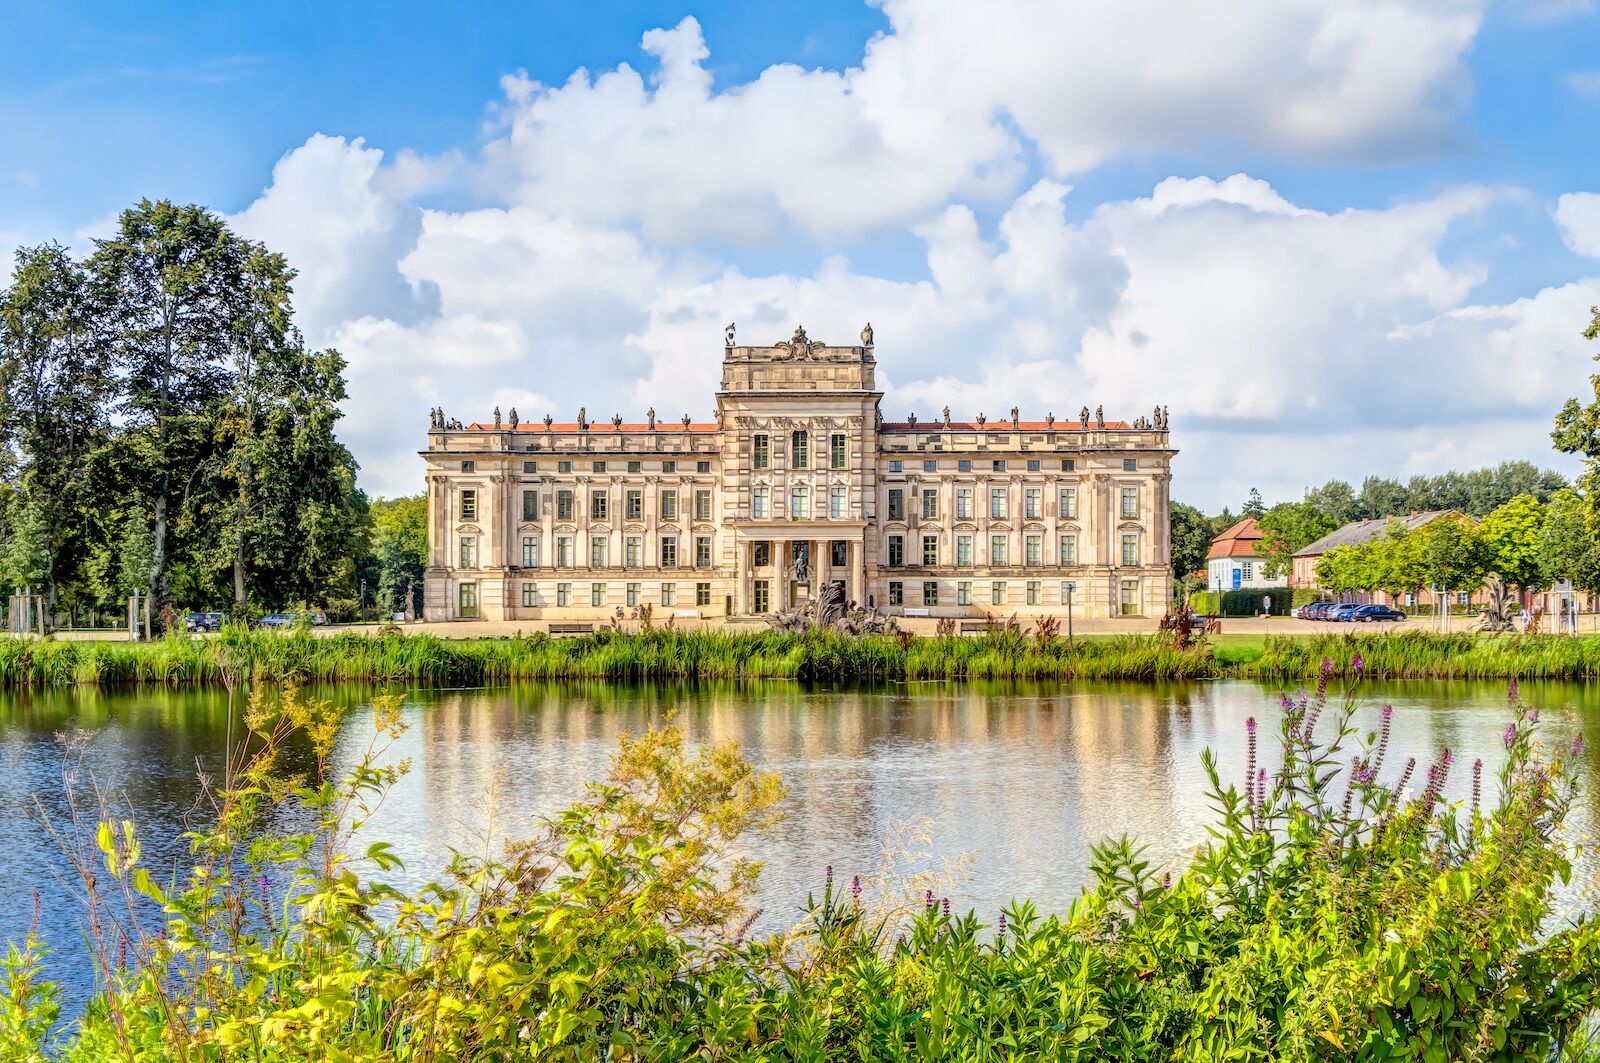 Ludwigslust Palace in Baroque architecture style in the town of Ludwigslust, Mecklenburg-West Pomerania